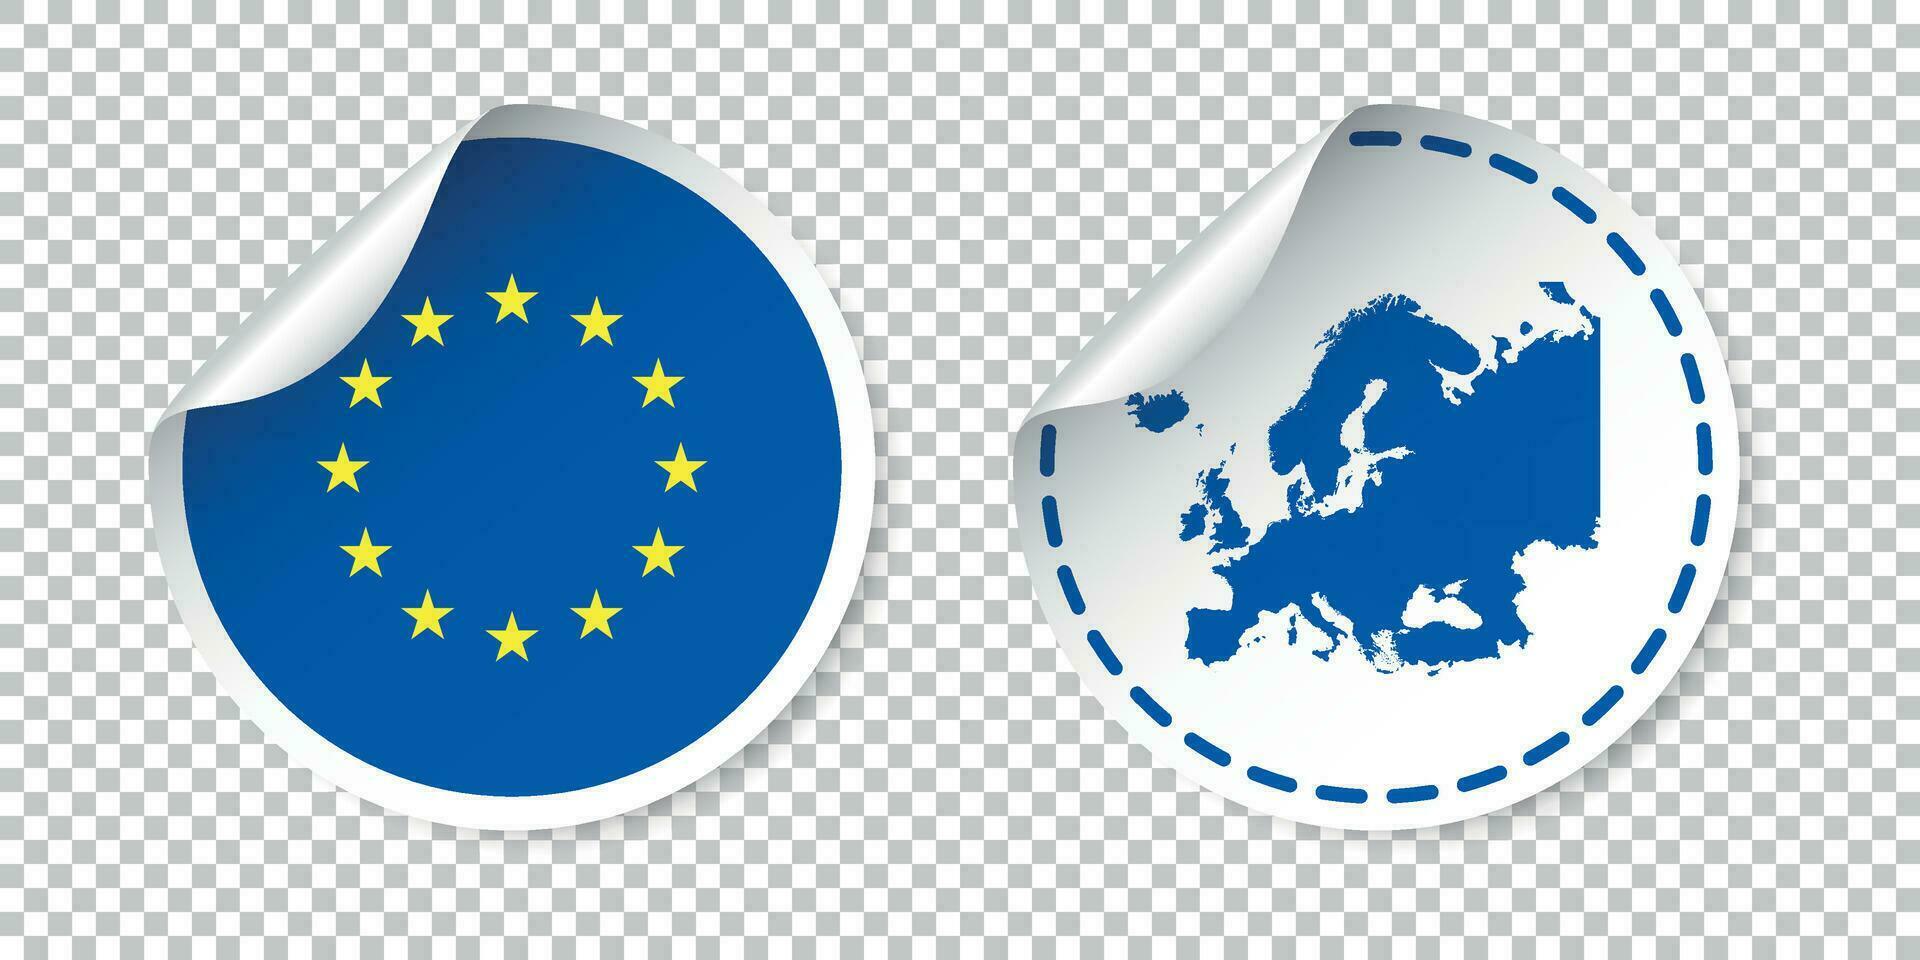 Europe sticker with flag and map. European Union label, round tag with country. Vector illustration on isolated background.